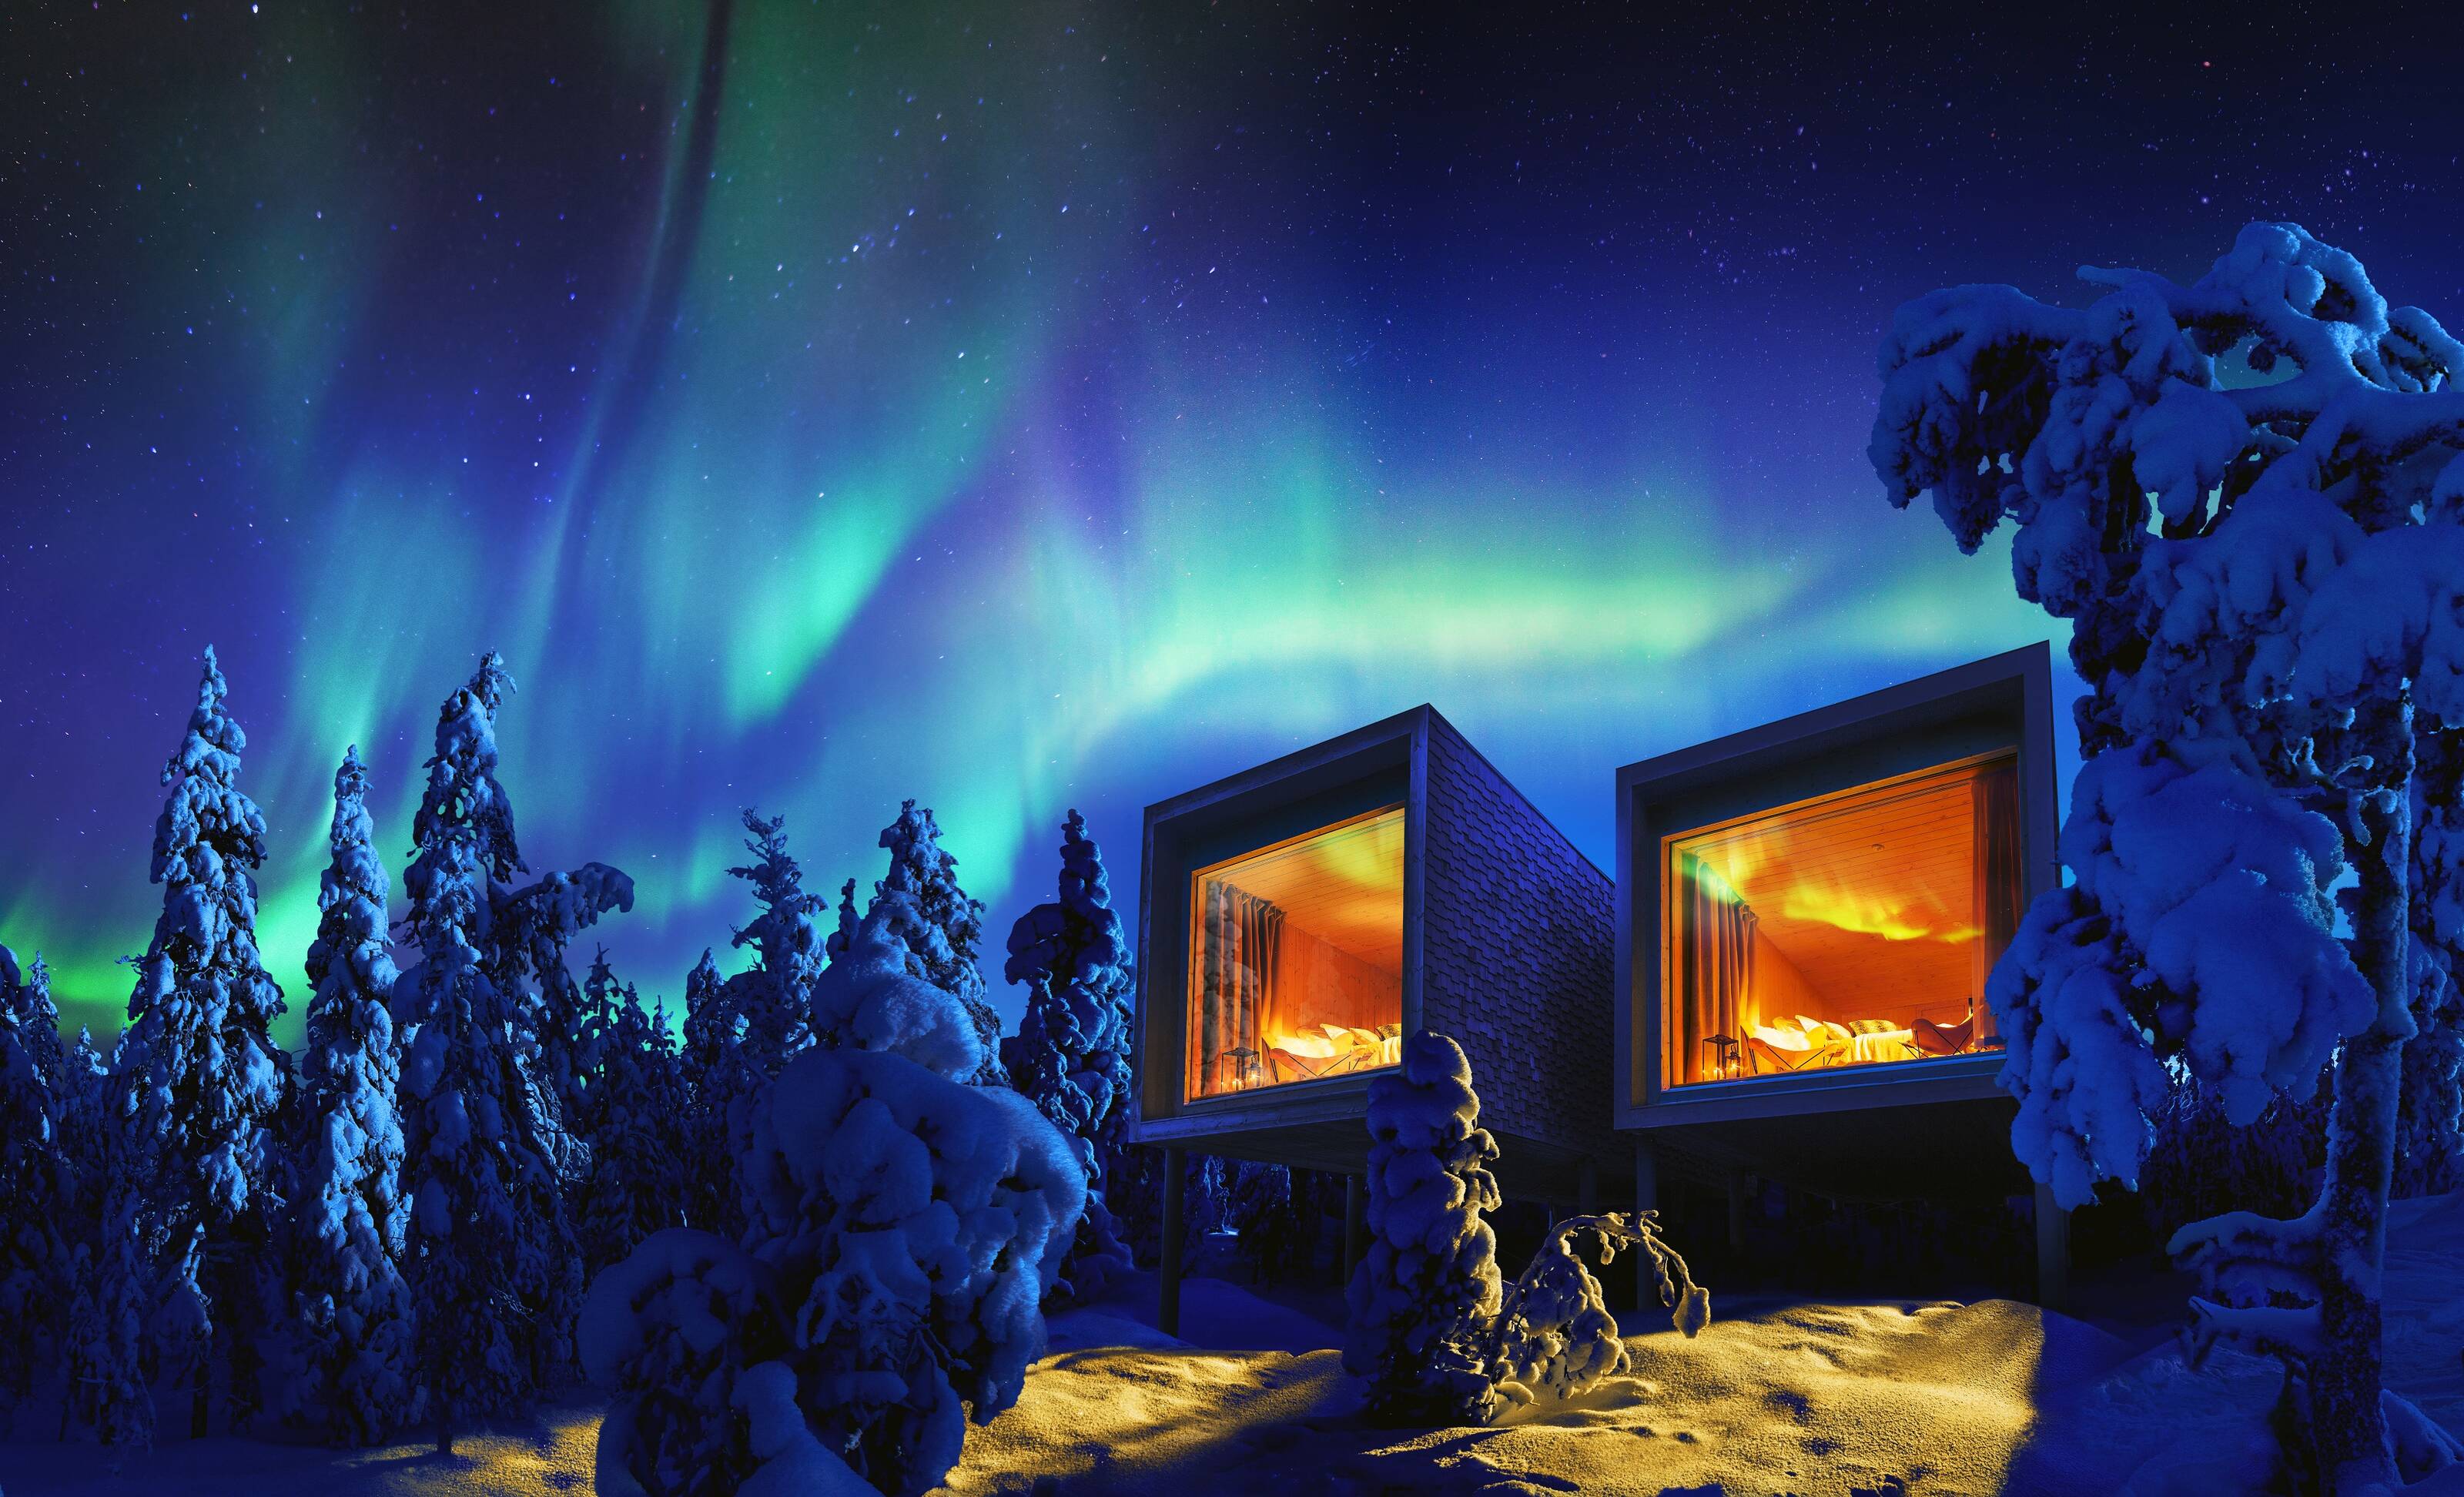 Arctic tree house in Lapland with northern lights visible.